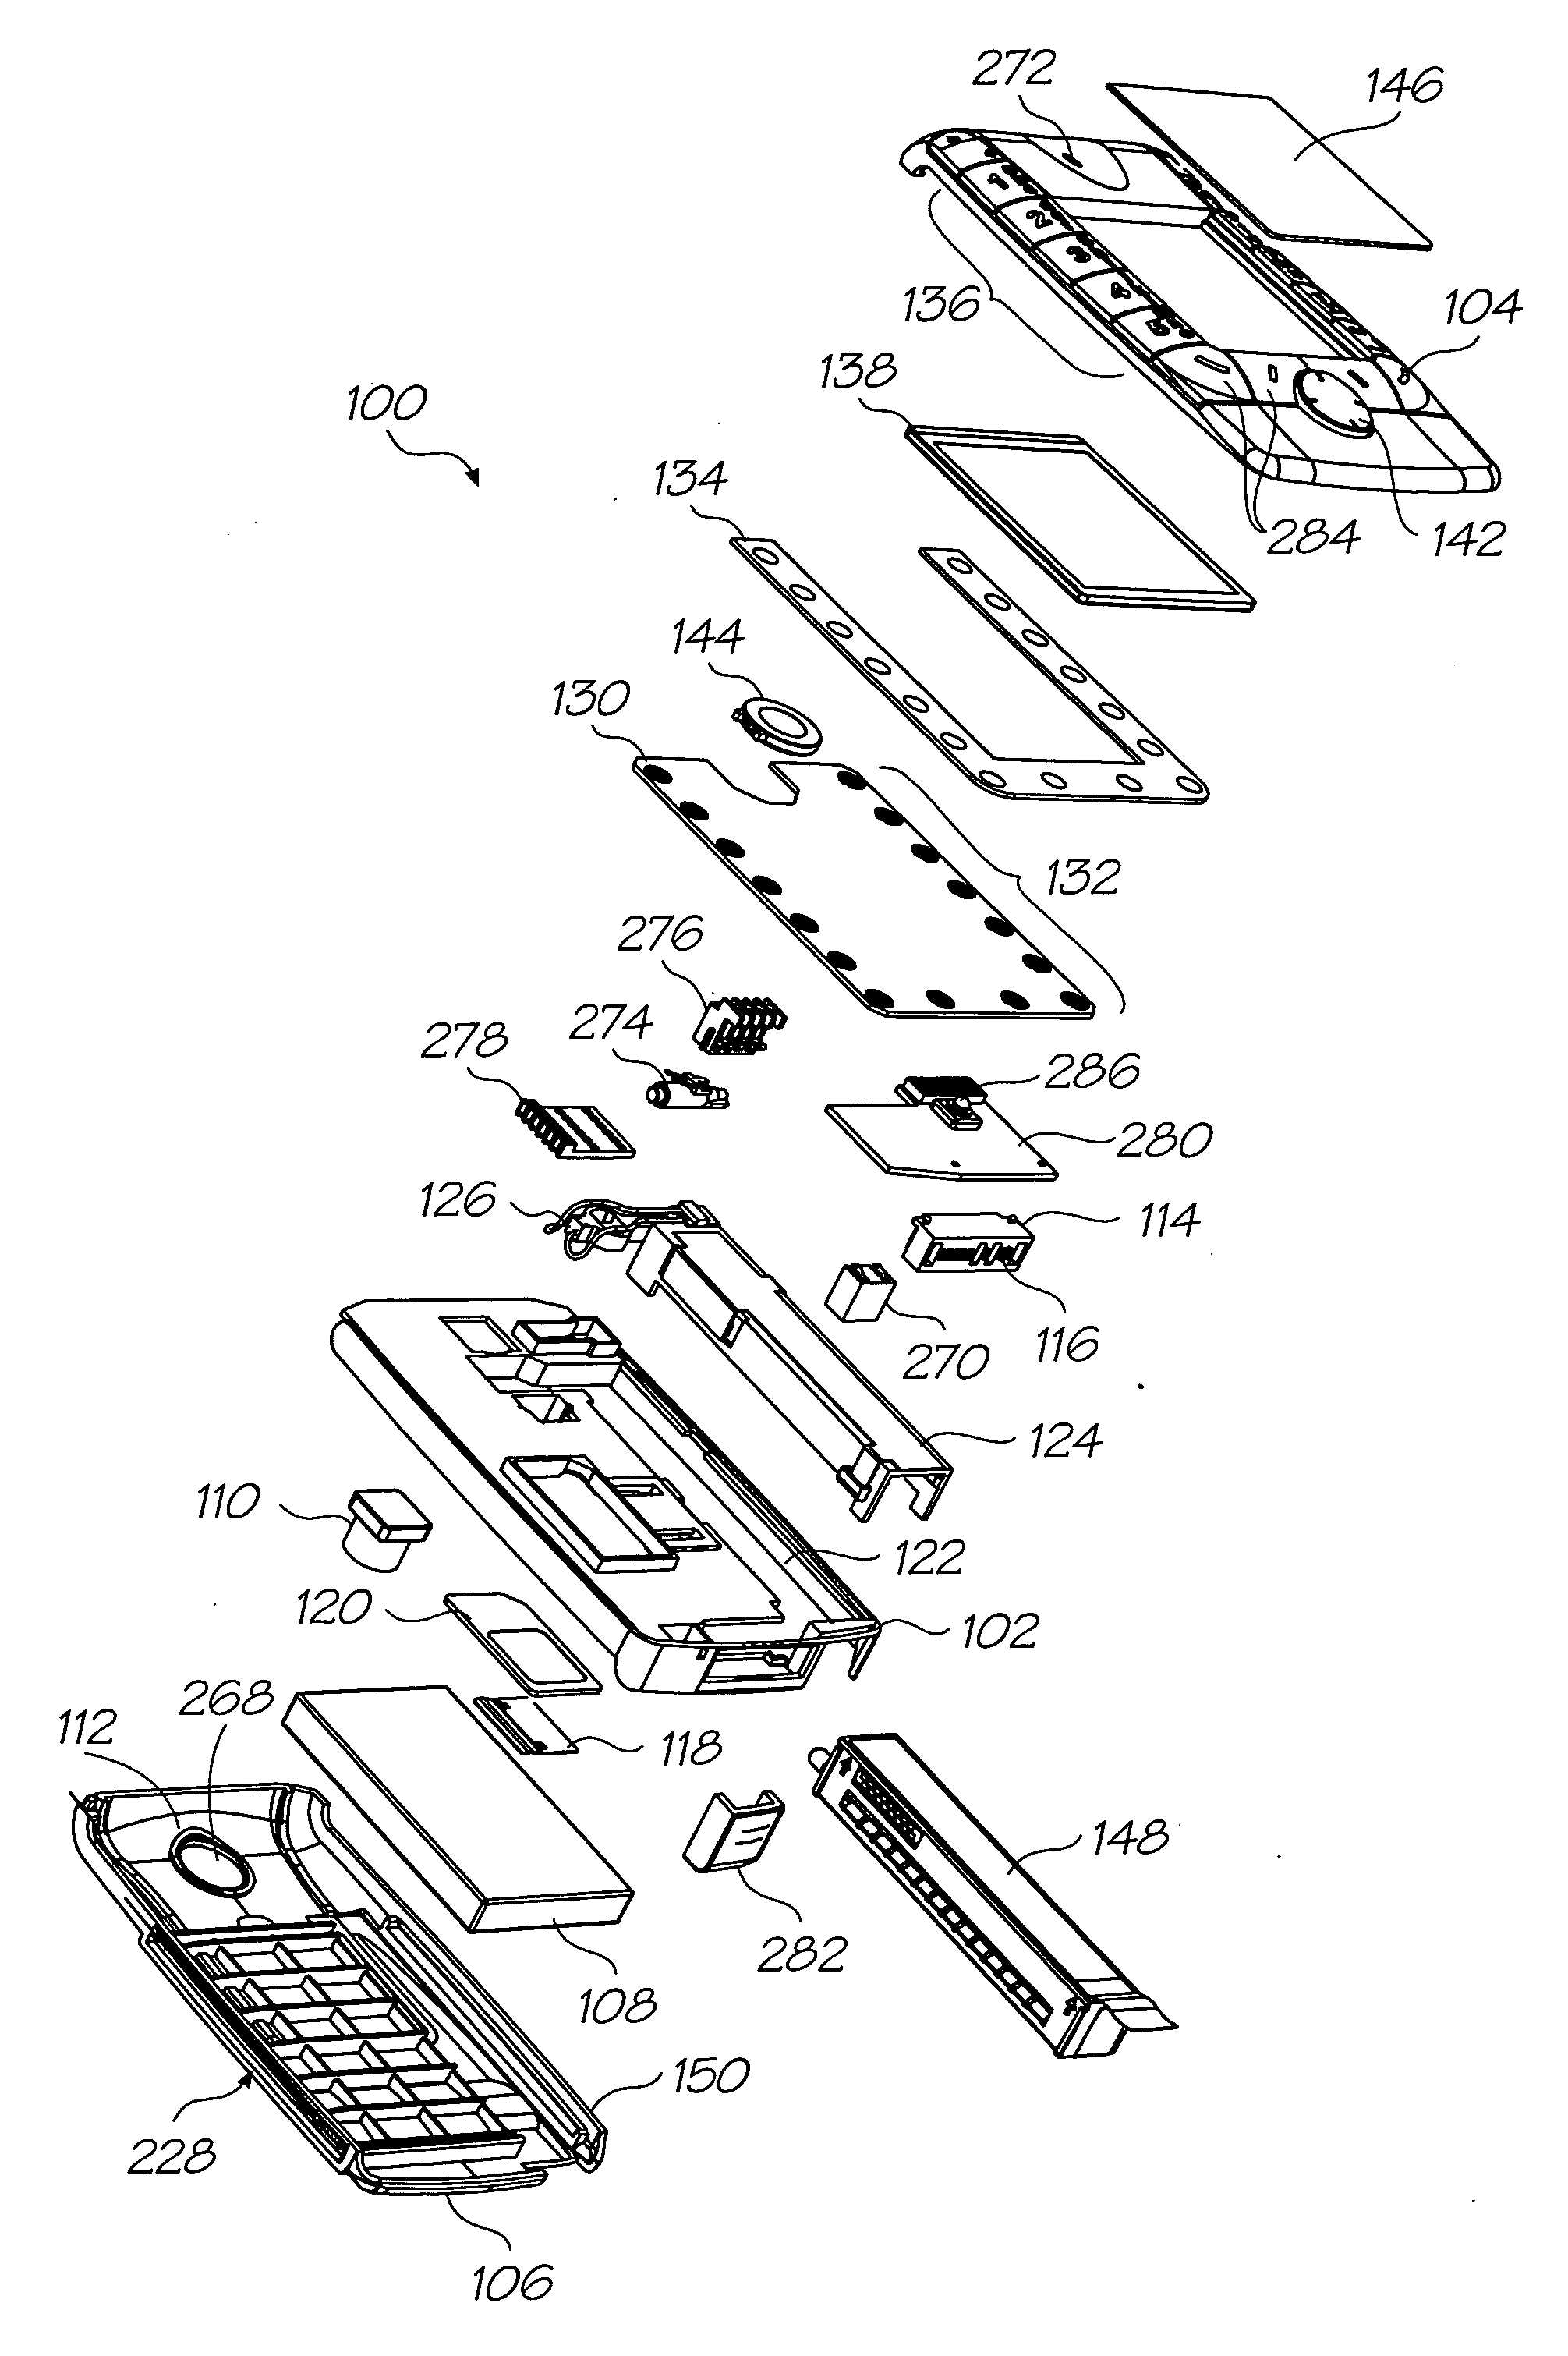 Print cartridge with friction driven media feed shaft